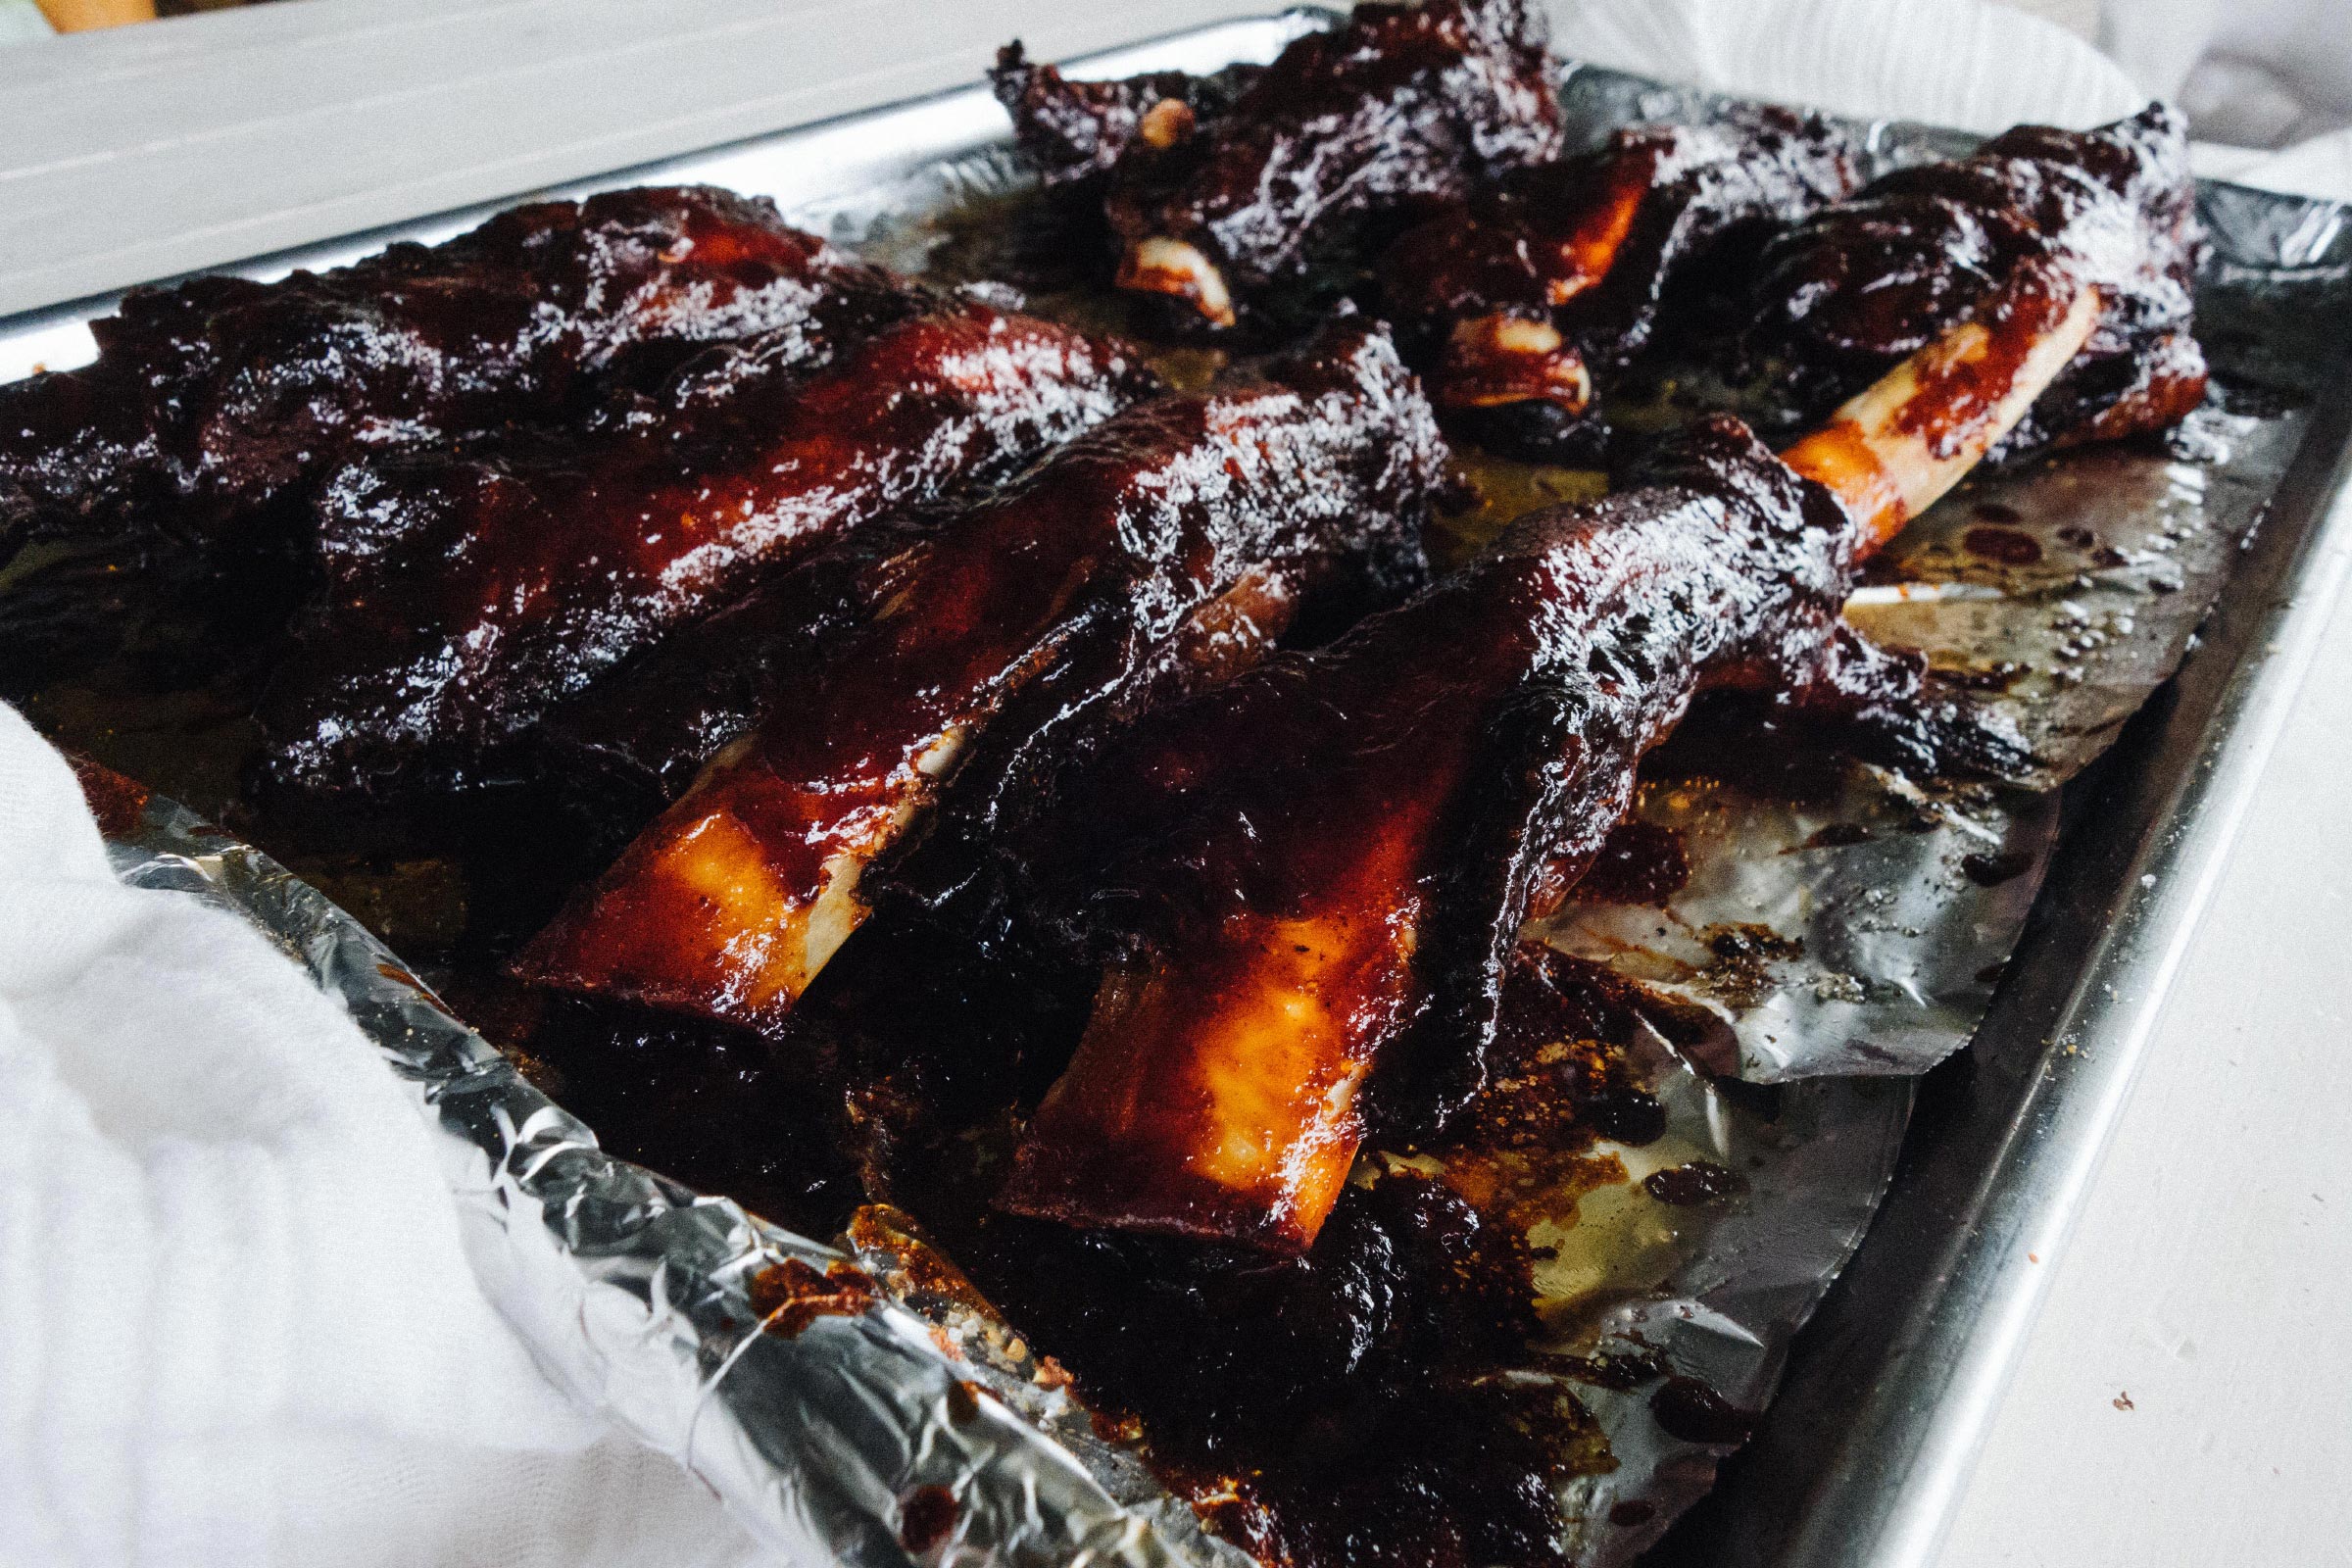 PopPop's Ribs Recipe from Food Vibes